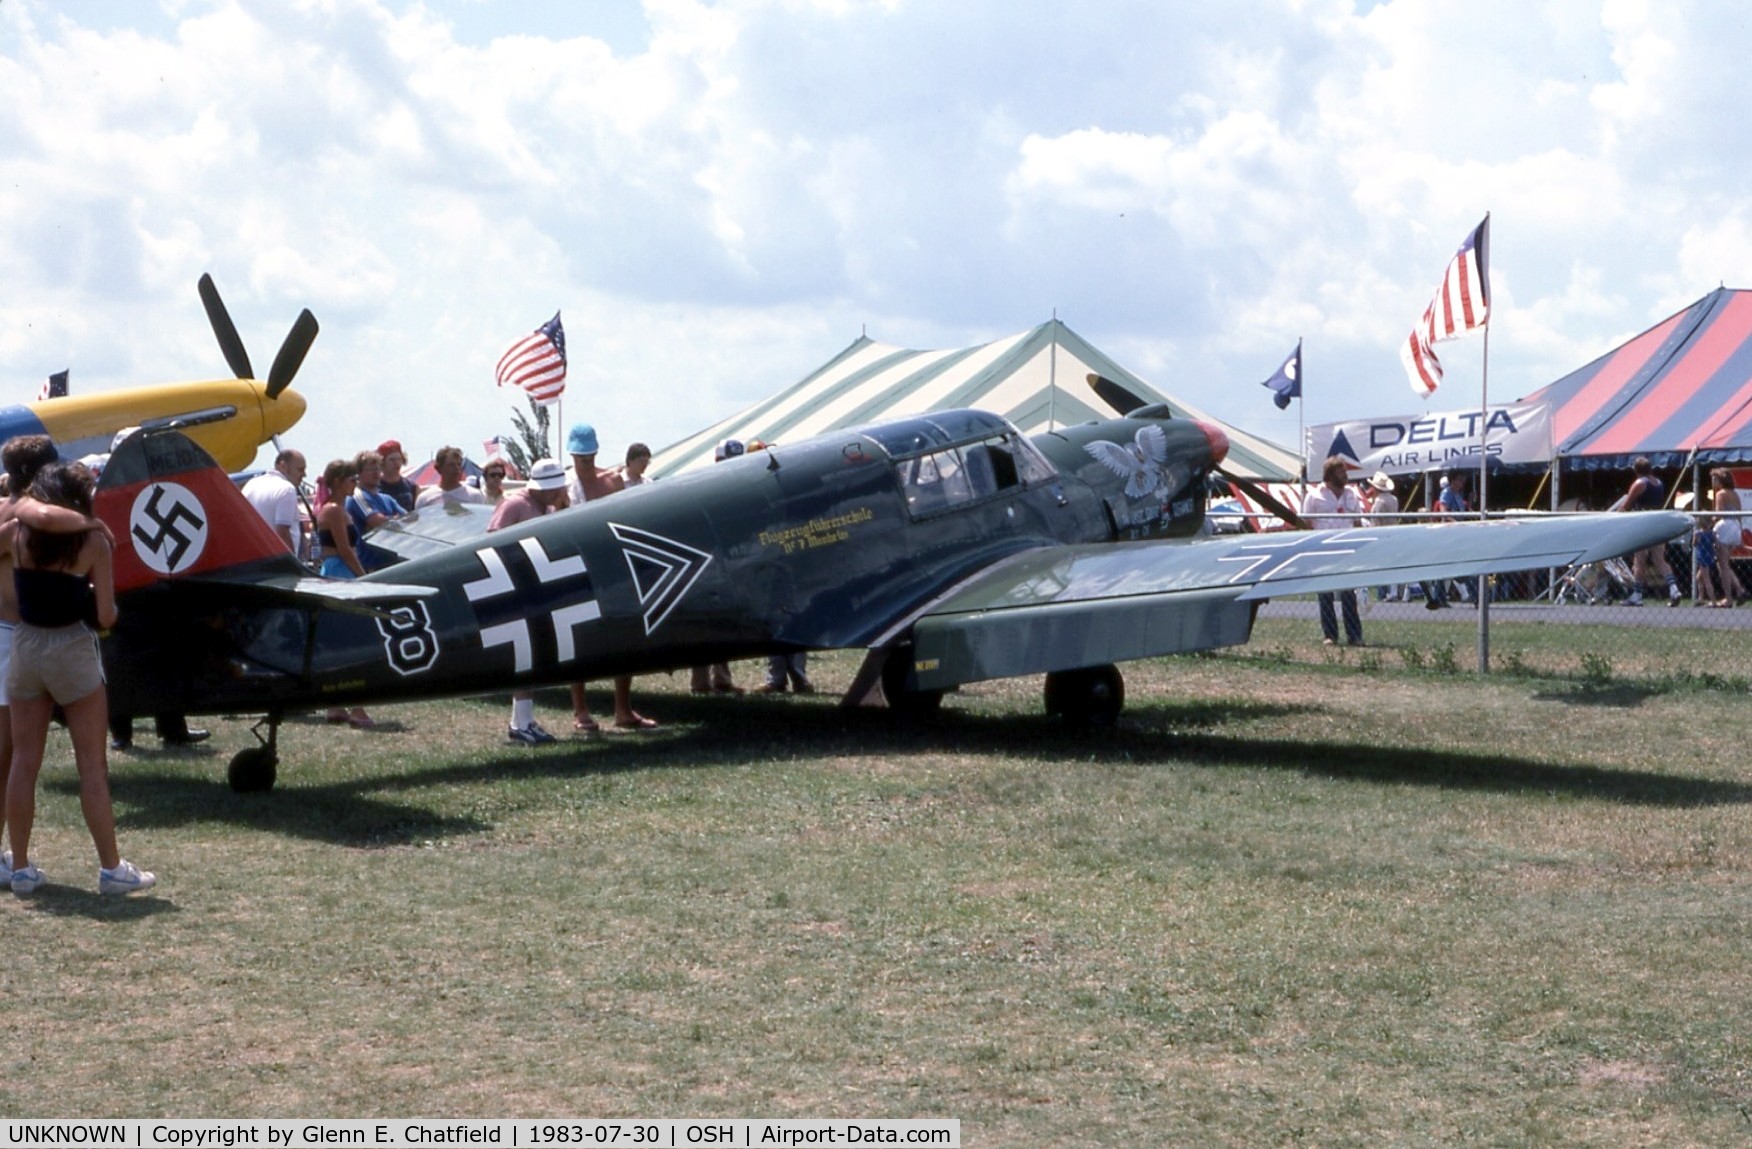 UNKNOWN, , Me. 108 at the EAA Fly In - does anyone know its registry?